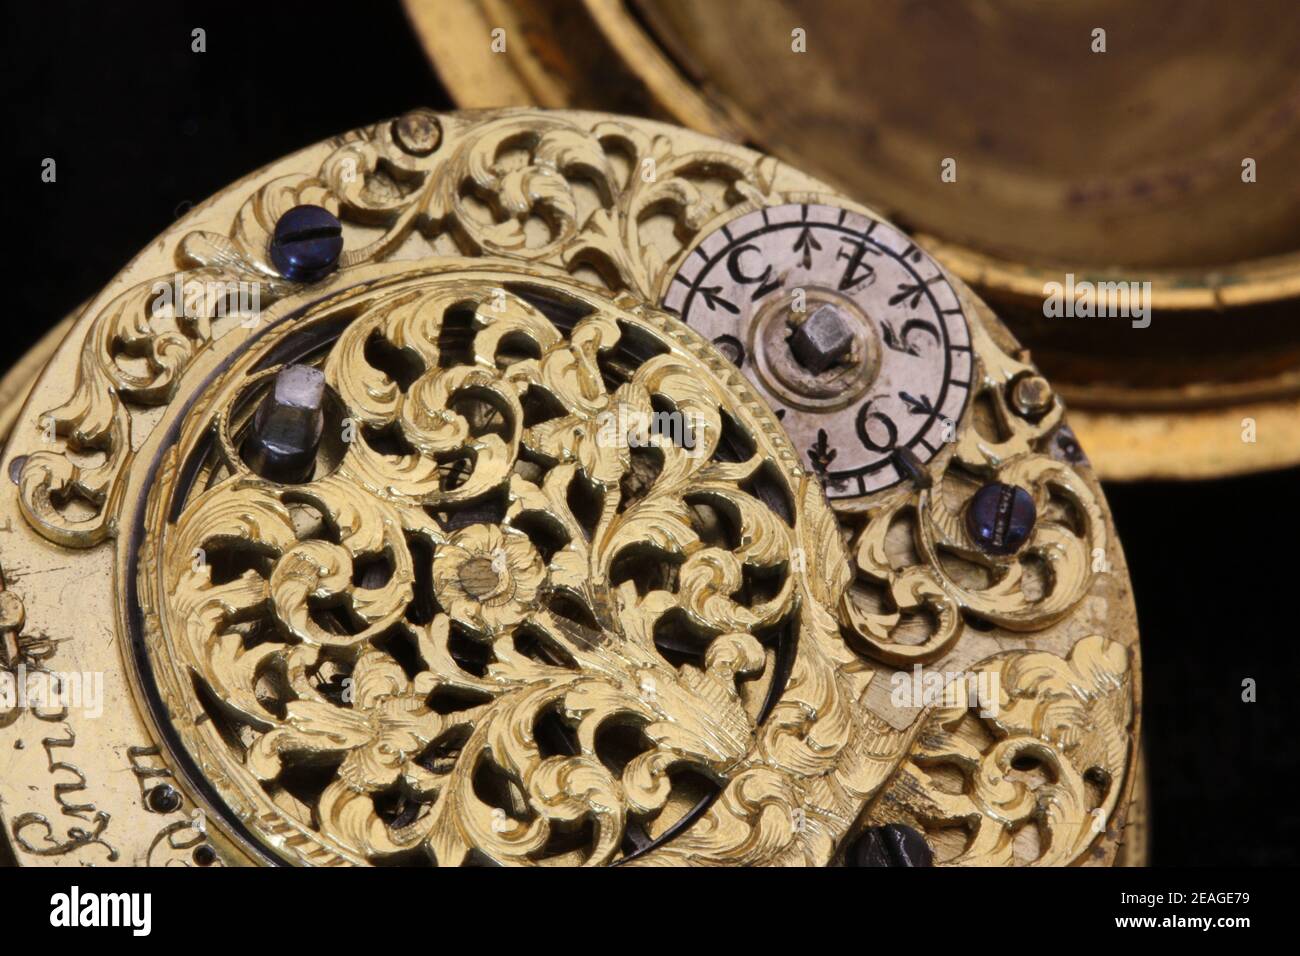 Antique Pocket watch made by James Marwick of London approx 1690 macro image of the chiming verge movement Stock Photo